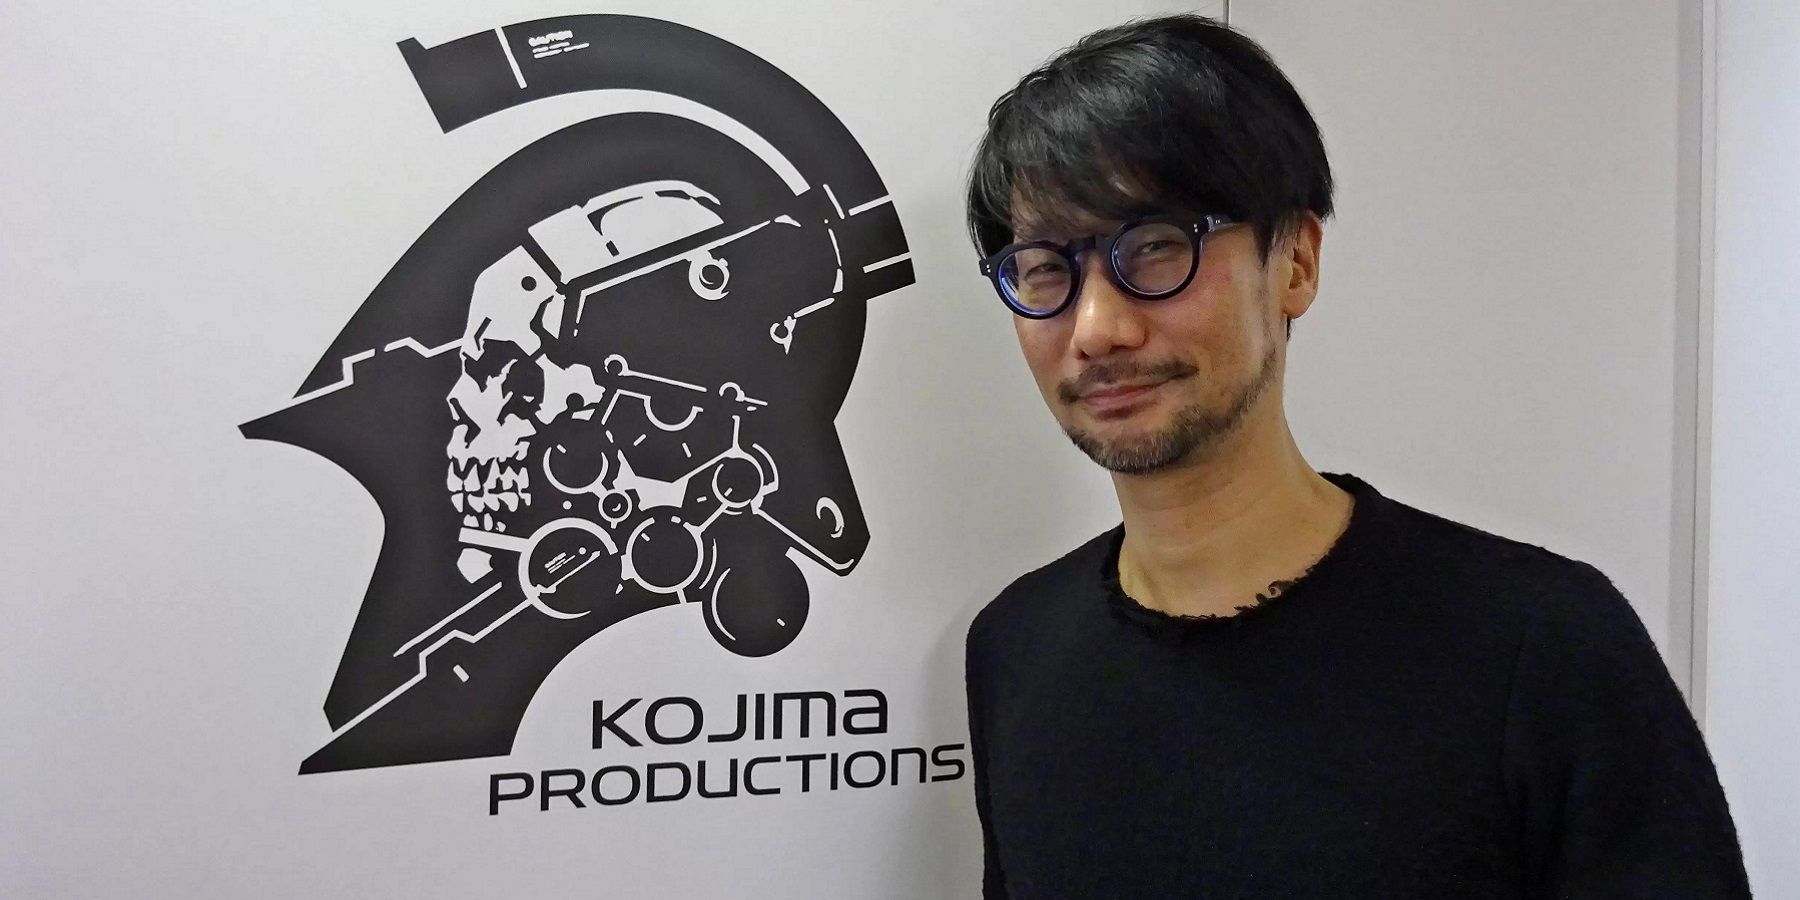 Hideo Kojima and The Steam Deck At the TGS 2022